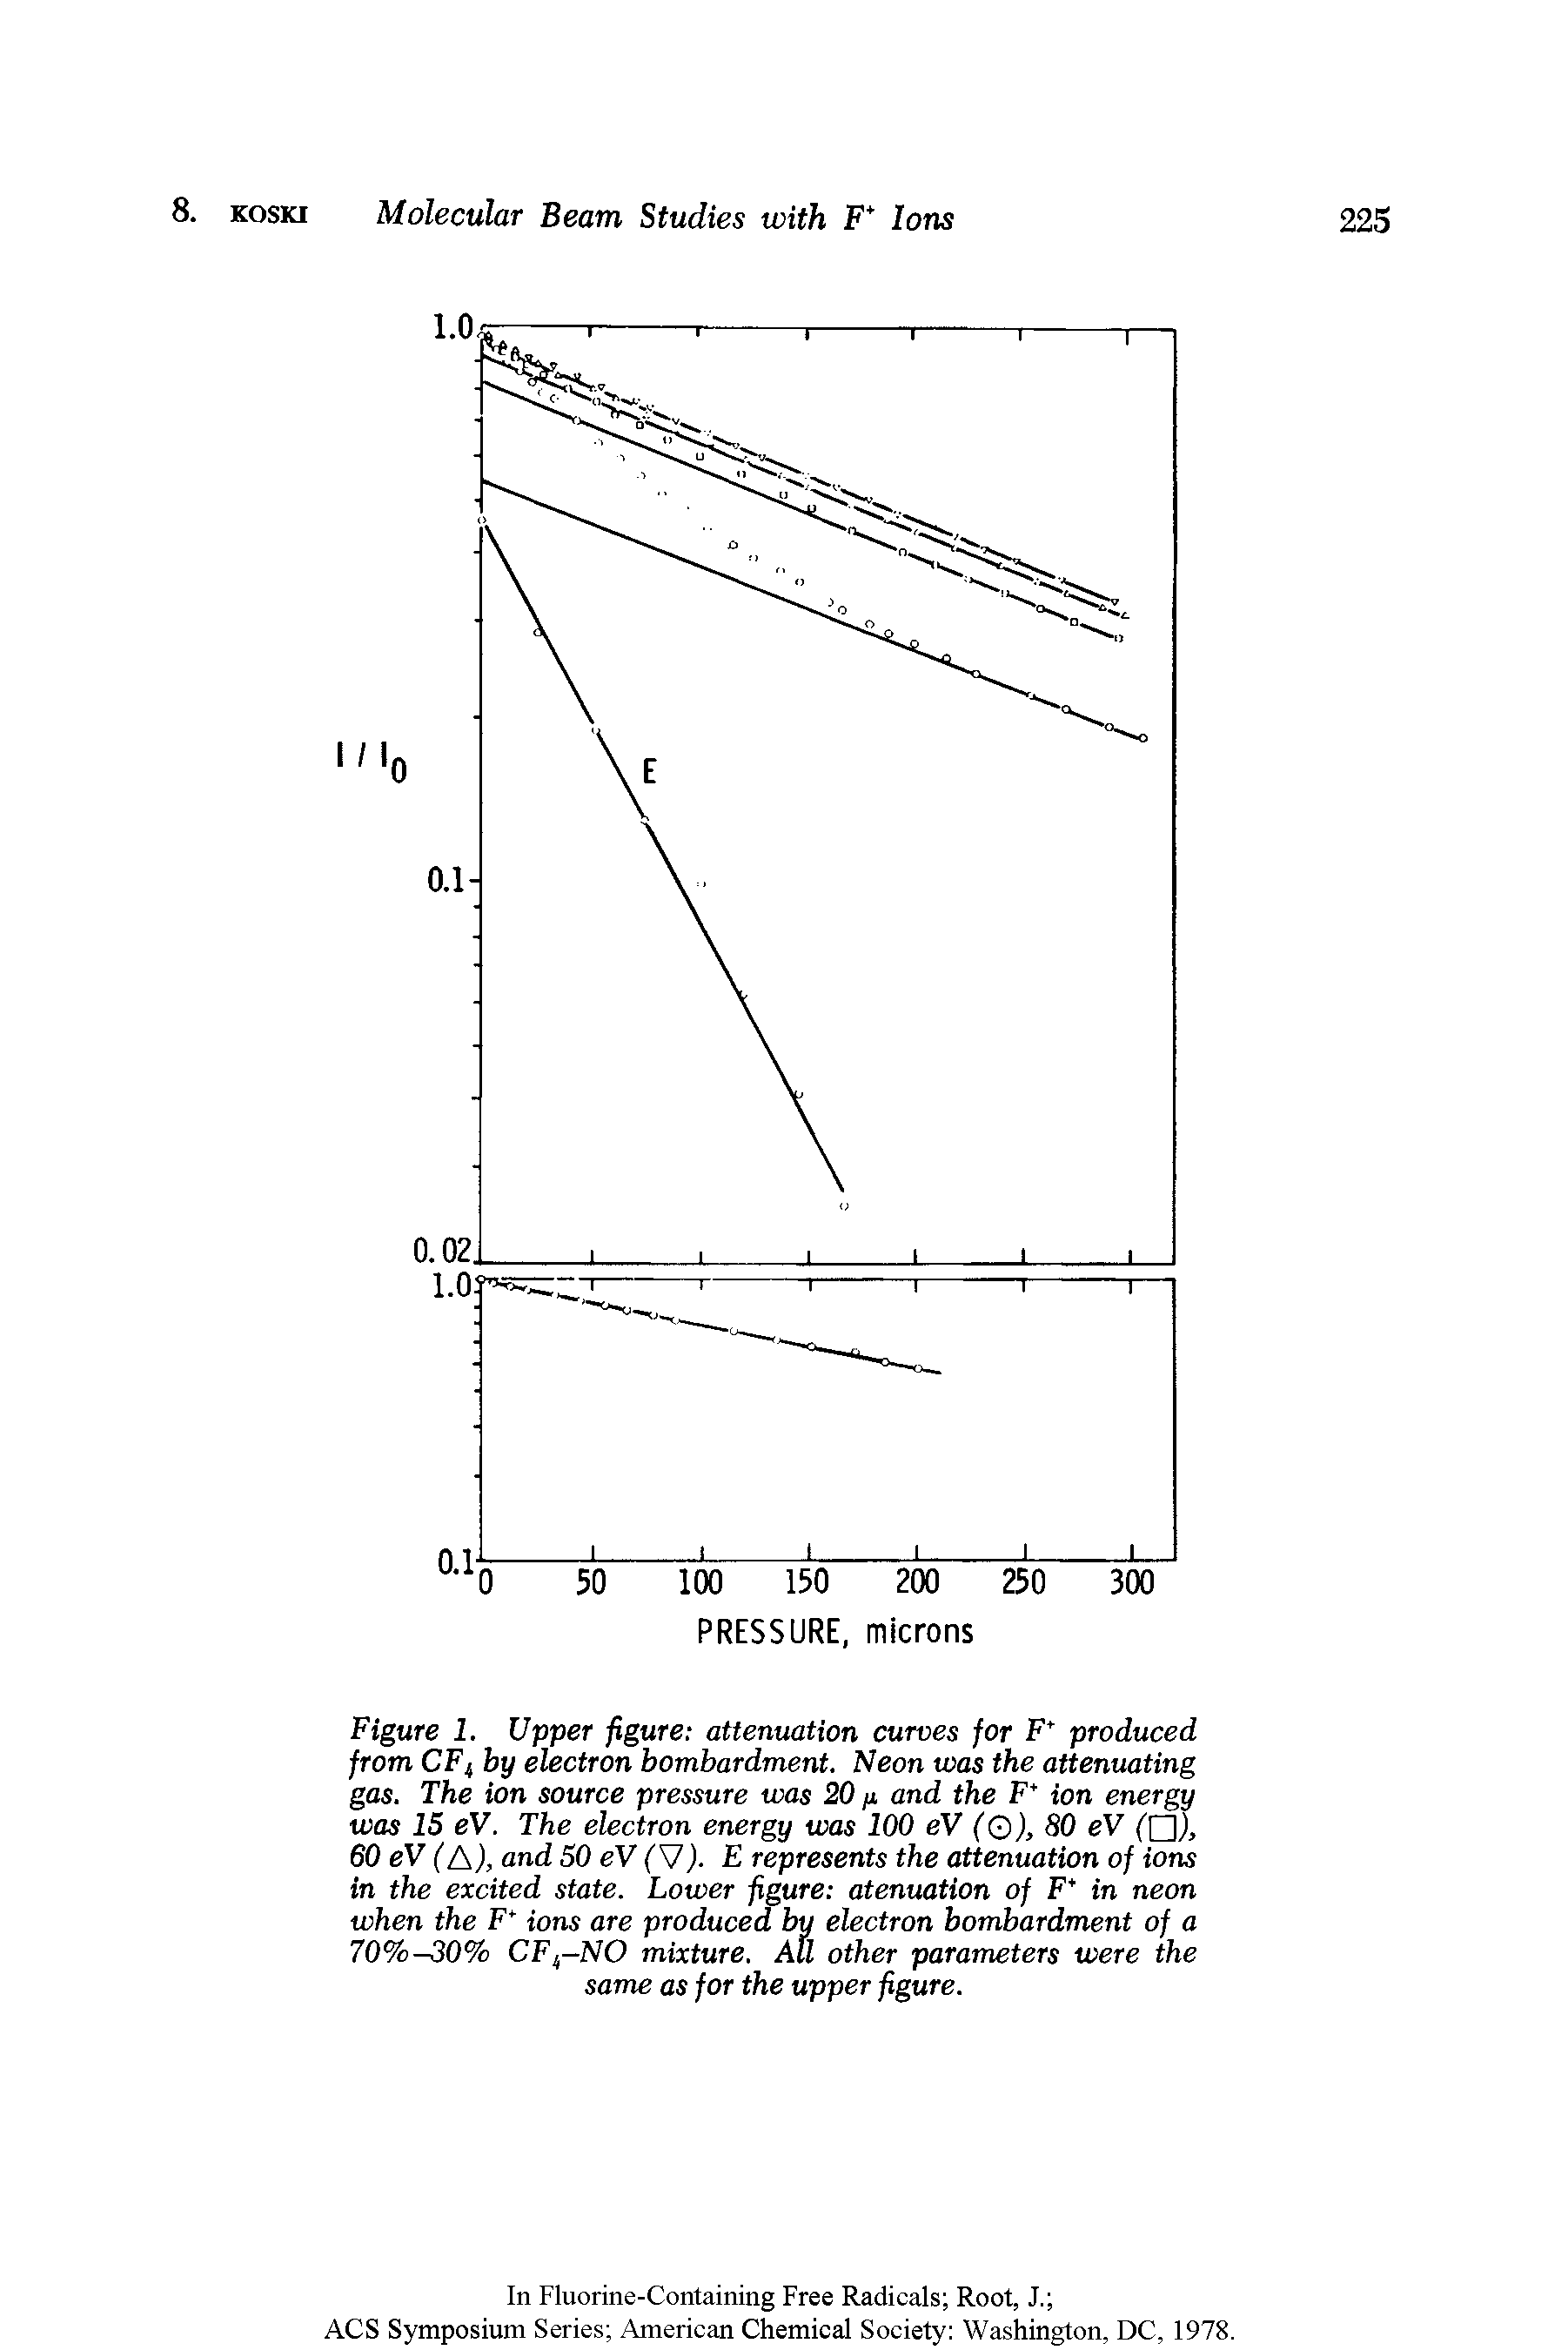 Figure 1. Upper figure attenuation curves for F produced from CFf by electron bombardment. Neon was the attenuating gas. The ion source pressure was 20 and the F ion energy was 15 eV. The electron energy was 100 eV (Q), 80 eV 60 eV (A), and SO eV (S7). E represents the attenuation of ions in the excited state. Lower figure atenuation of F in neon when the F ions are produced by electron bombardment of a 70%-30% CFf-NO mixture. AU other parameters were the same as for the upper figure.